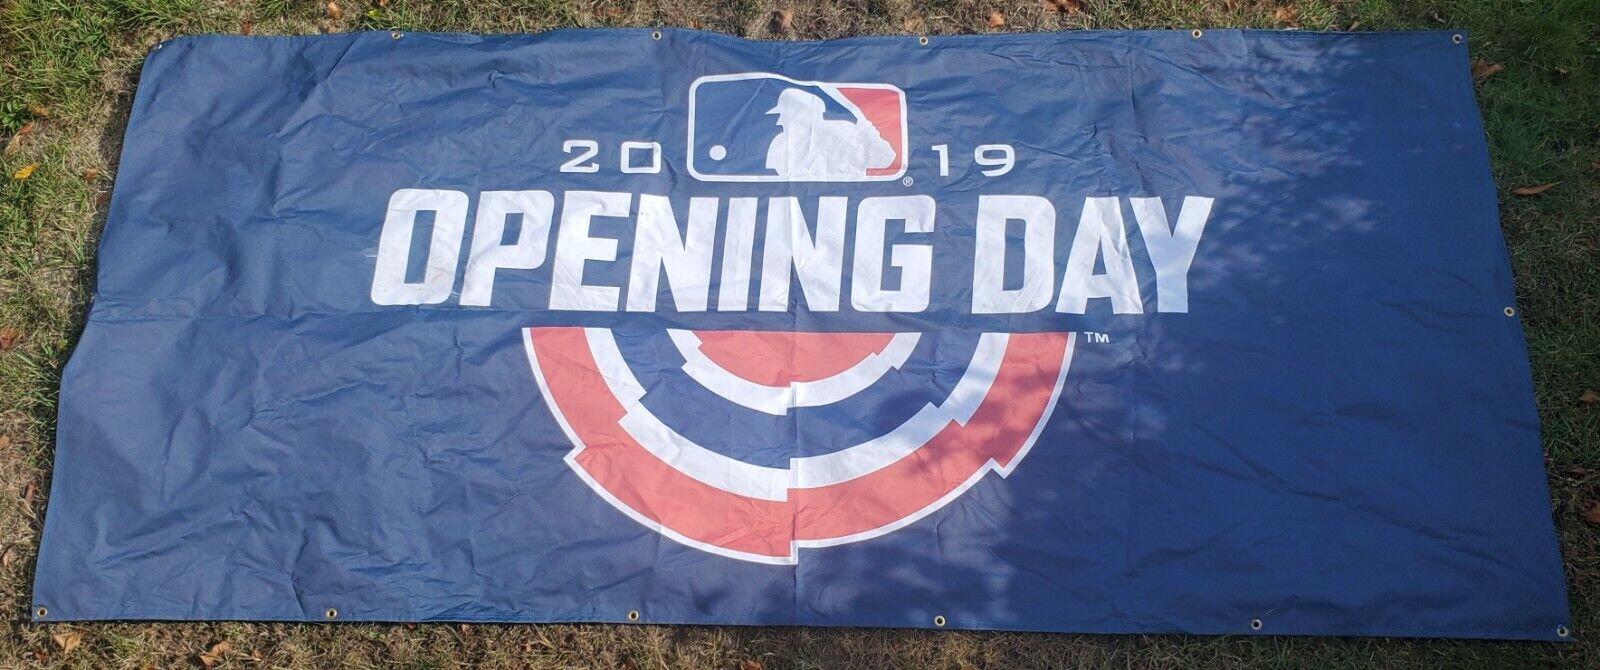 Game Used 2019 Opening Special Campaign Day Banner low-pricing 54